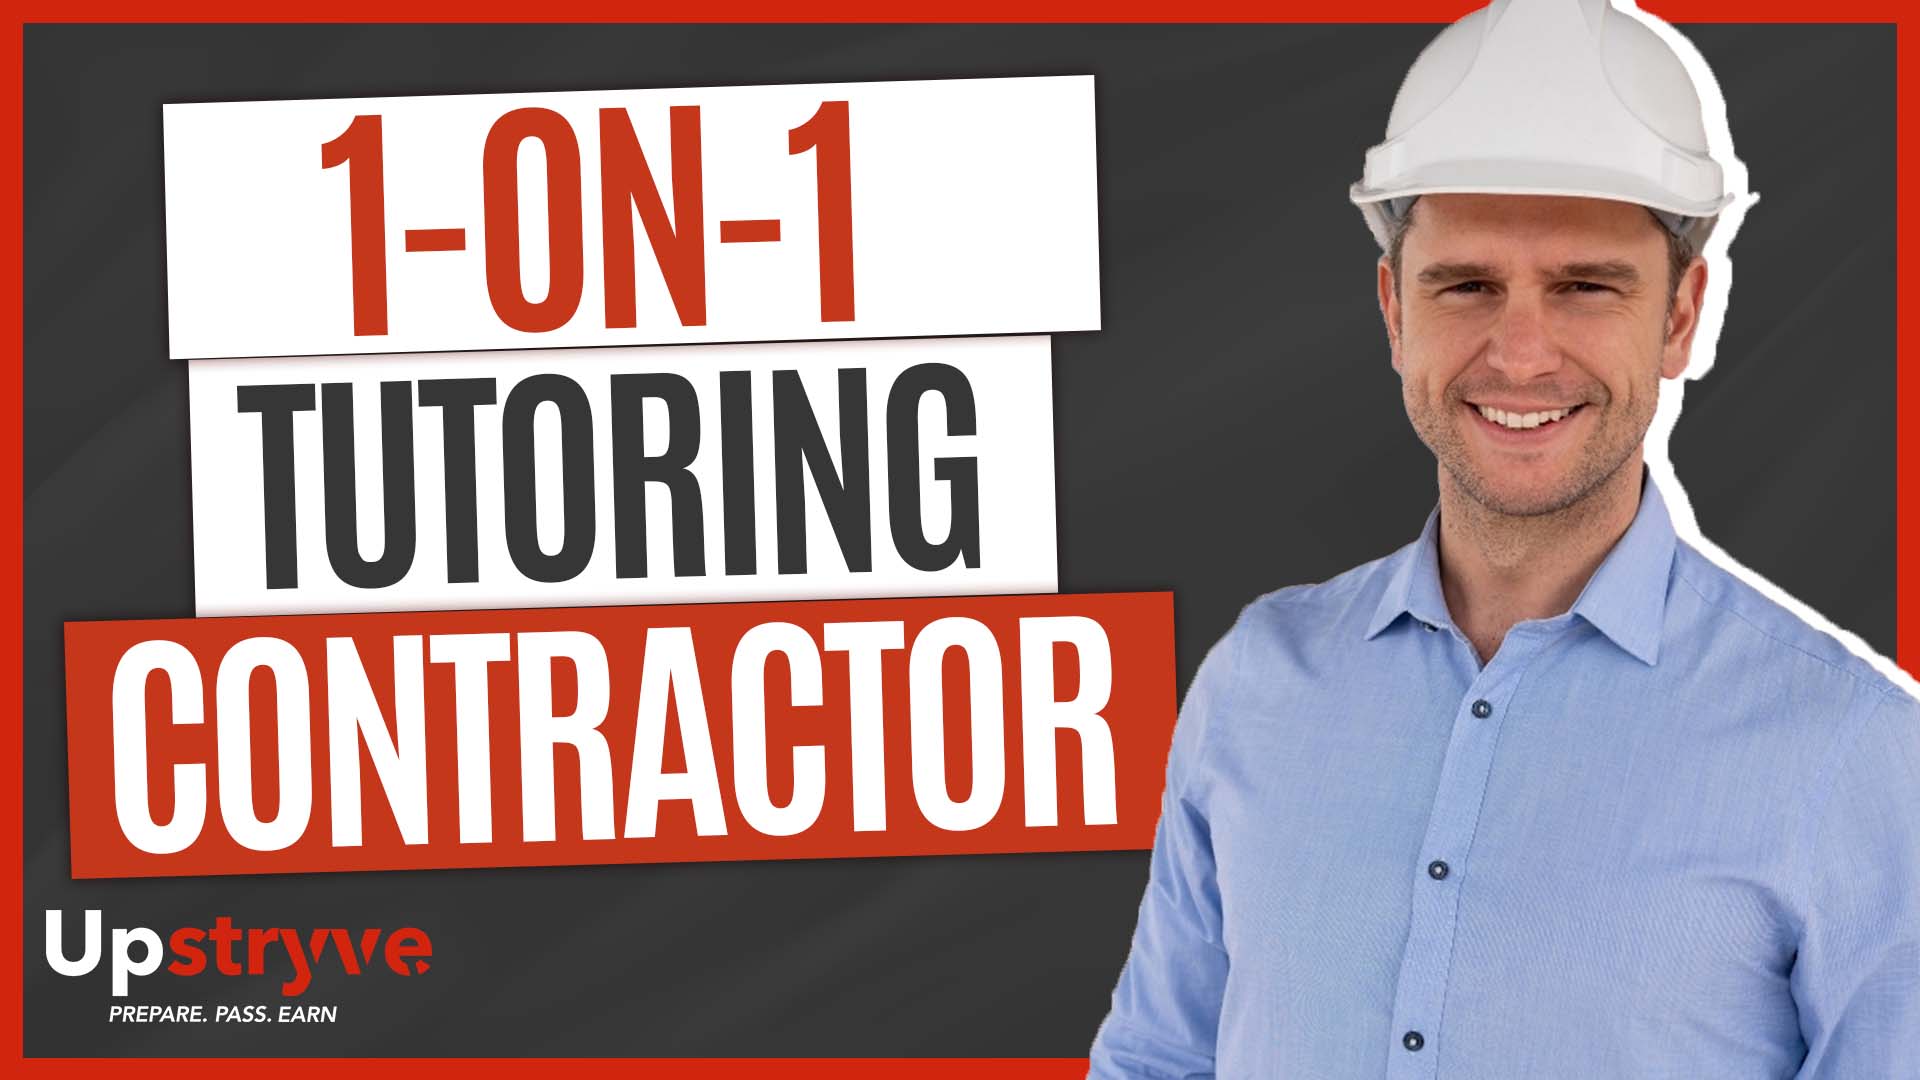 If you are looking for the best way to prepare for your contractor license exam then you've found it. Upstryve tutors are active and retired trade professionals who can help you 1 on 1 with any of your struggles. Our tutors have flexible schedules to meet you when it's most convenient for you. 

All of our 1 on 1 tutoring sessions are online which means you can now effectively prepare for your contractor license exam from the comfort of your own home. Upstryve tutors have years of experience in the trades and in the field which is why having them guide you through the studying process is so crucial. 

They have helped thousands of students study and pass their contractor license exams on their first try. Find a tutor today by clicking above or below. Take advantage of our 1 free hour promotion and find out how valuable the 1 on 1 online tutoring really is.